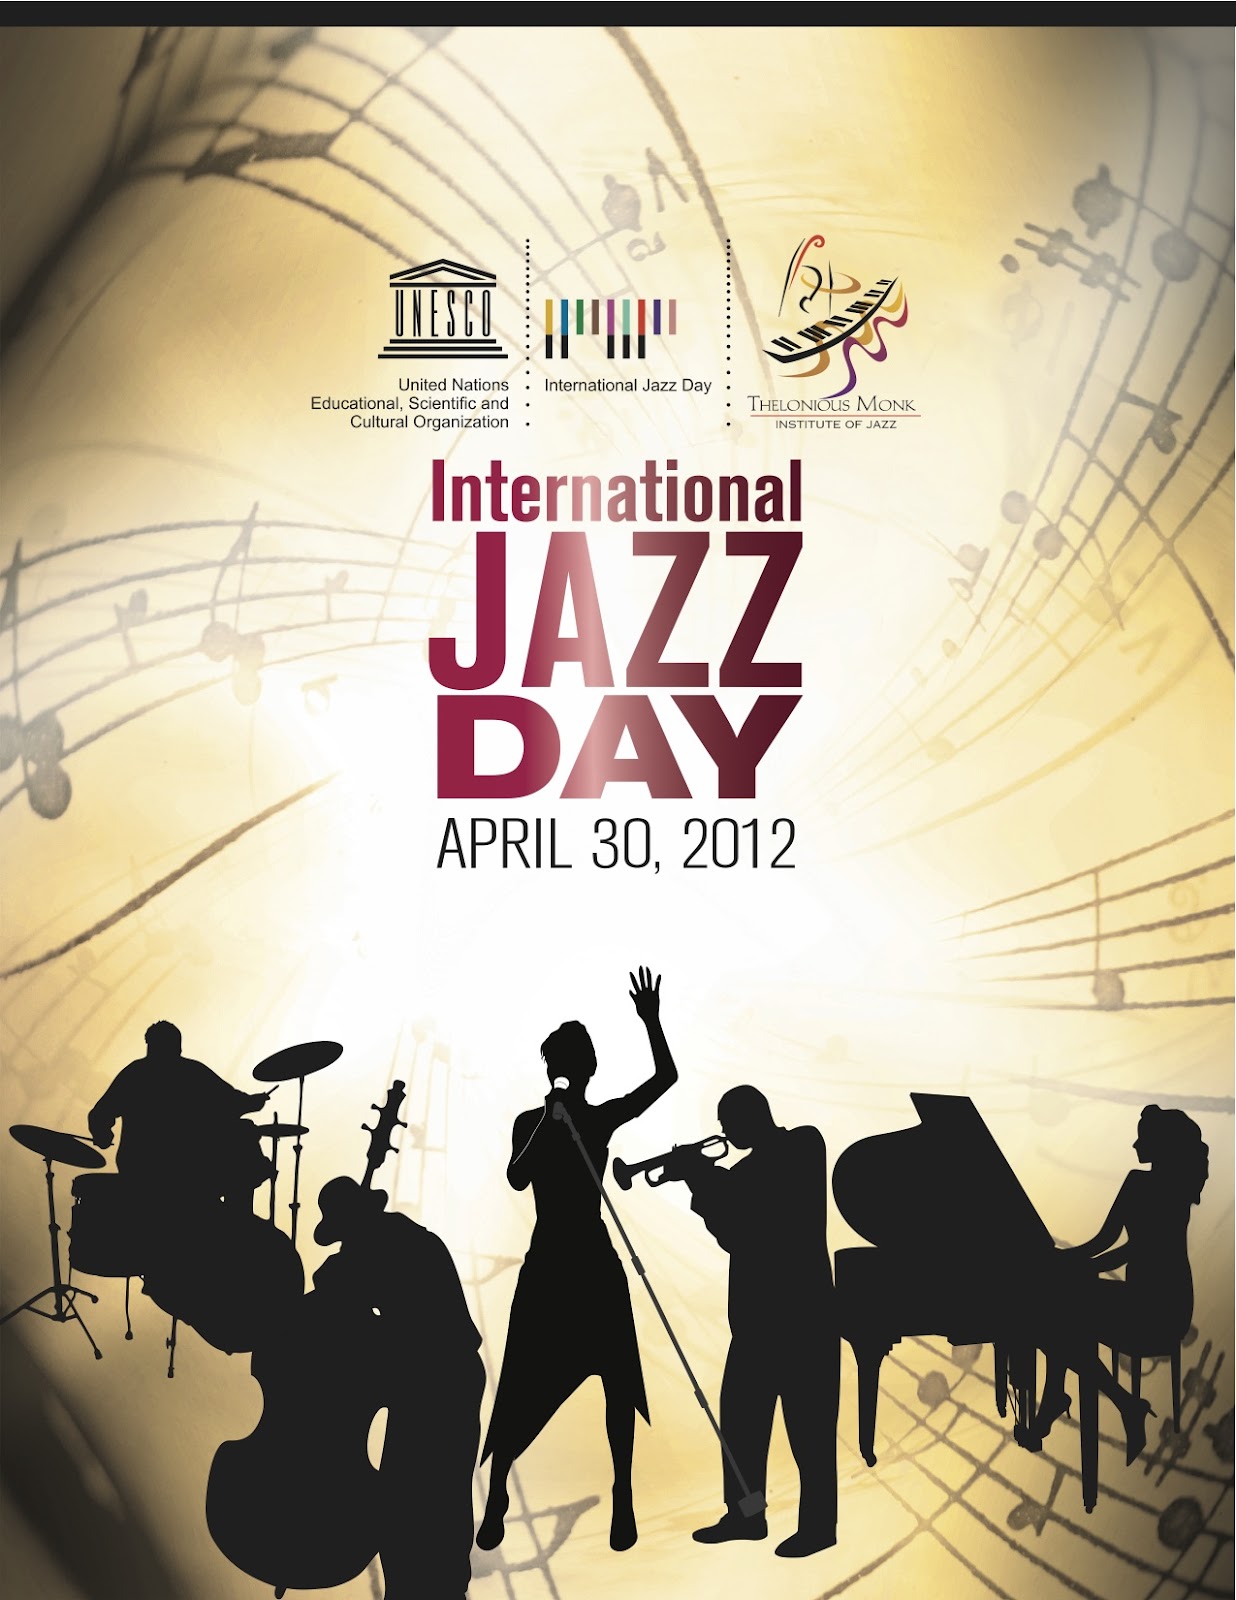 Living in the present International Jazz Day